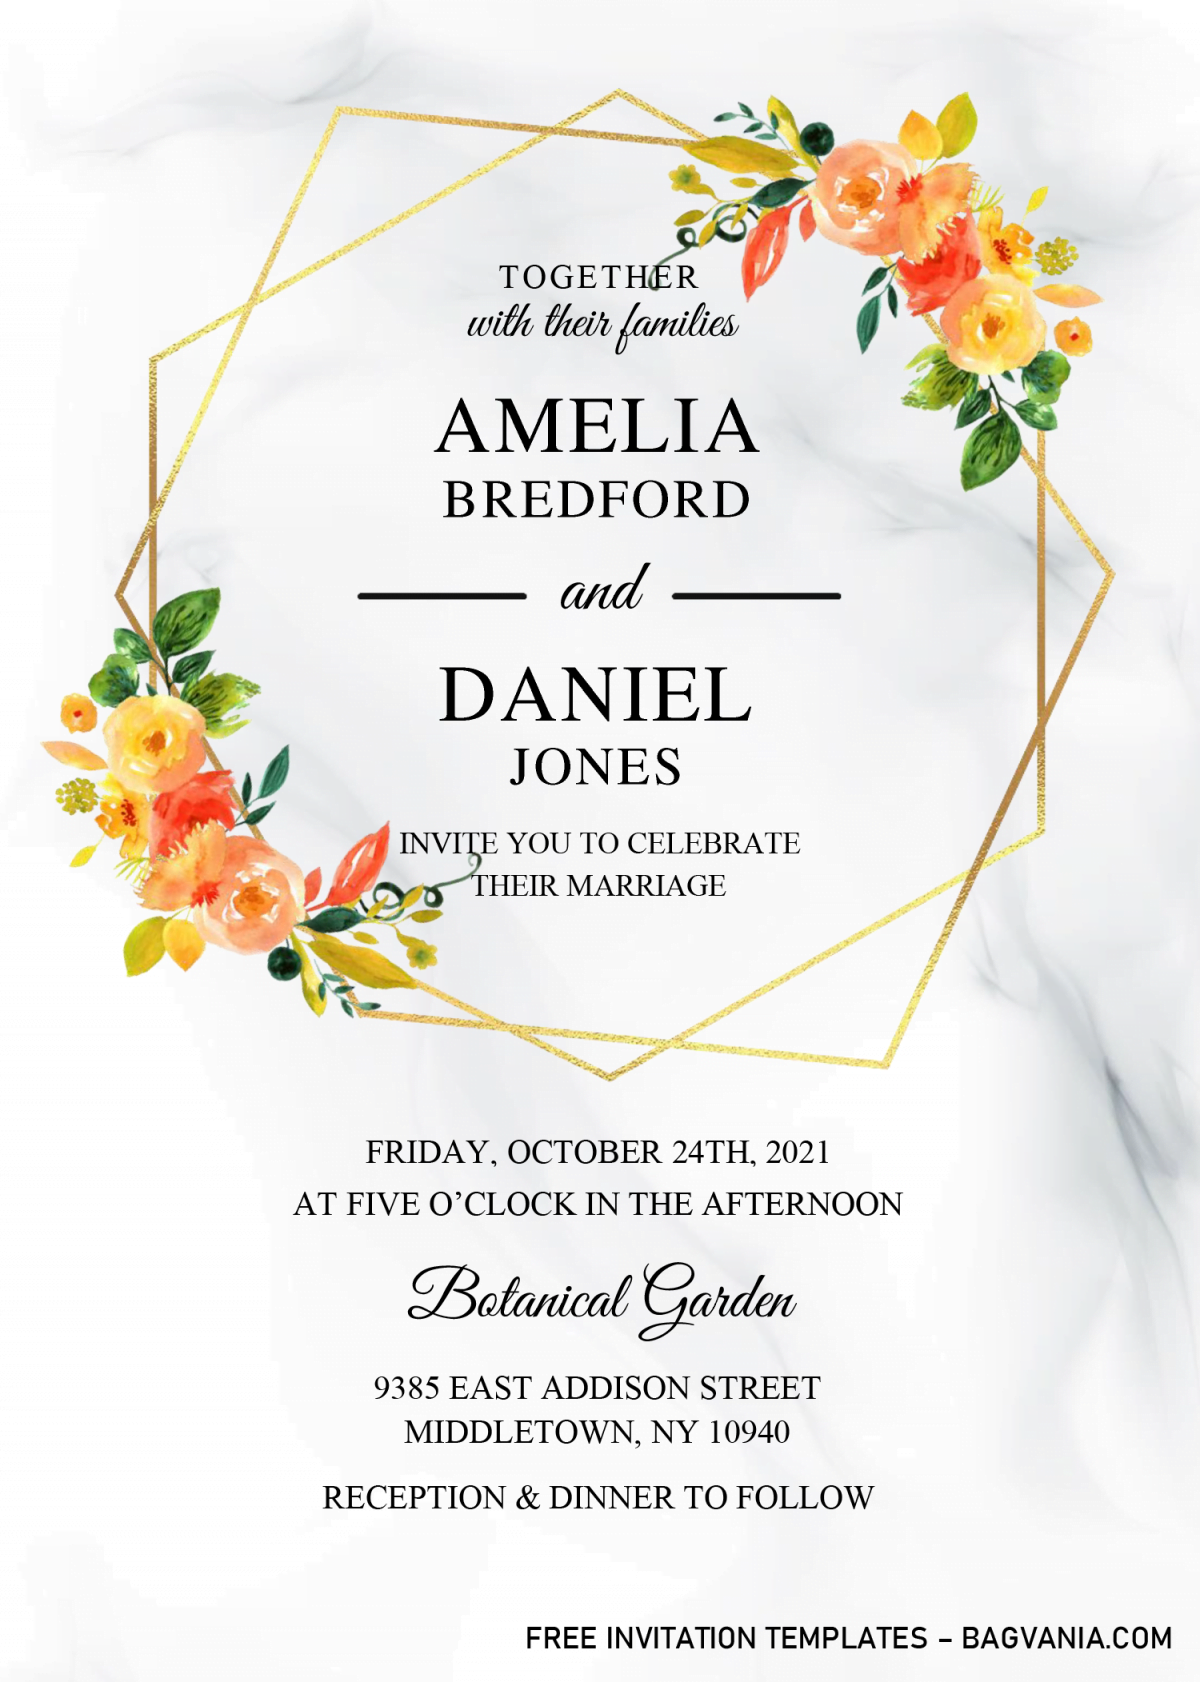 Gold Geometric Floral Invitation Templates - Editable With Microsoft Word and has watercolor floral